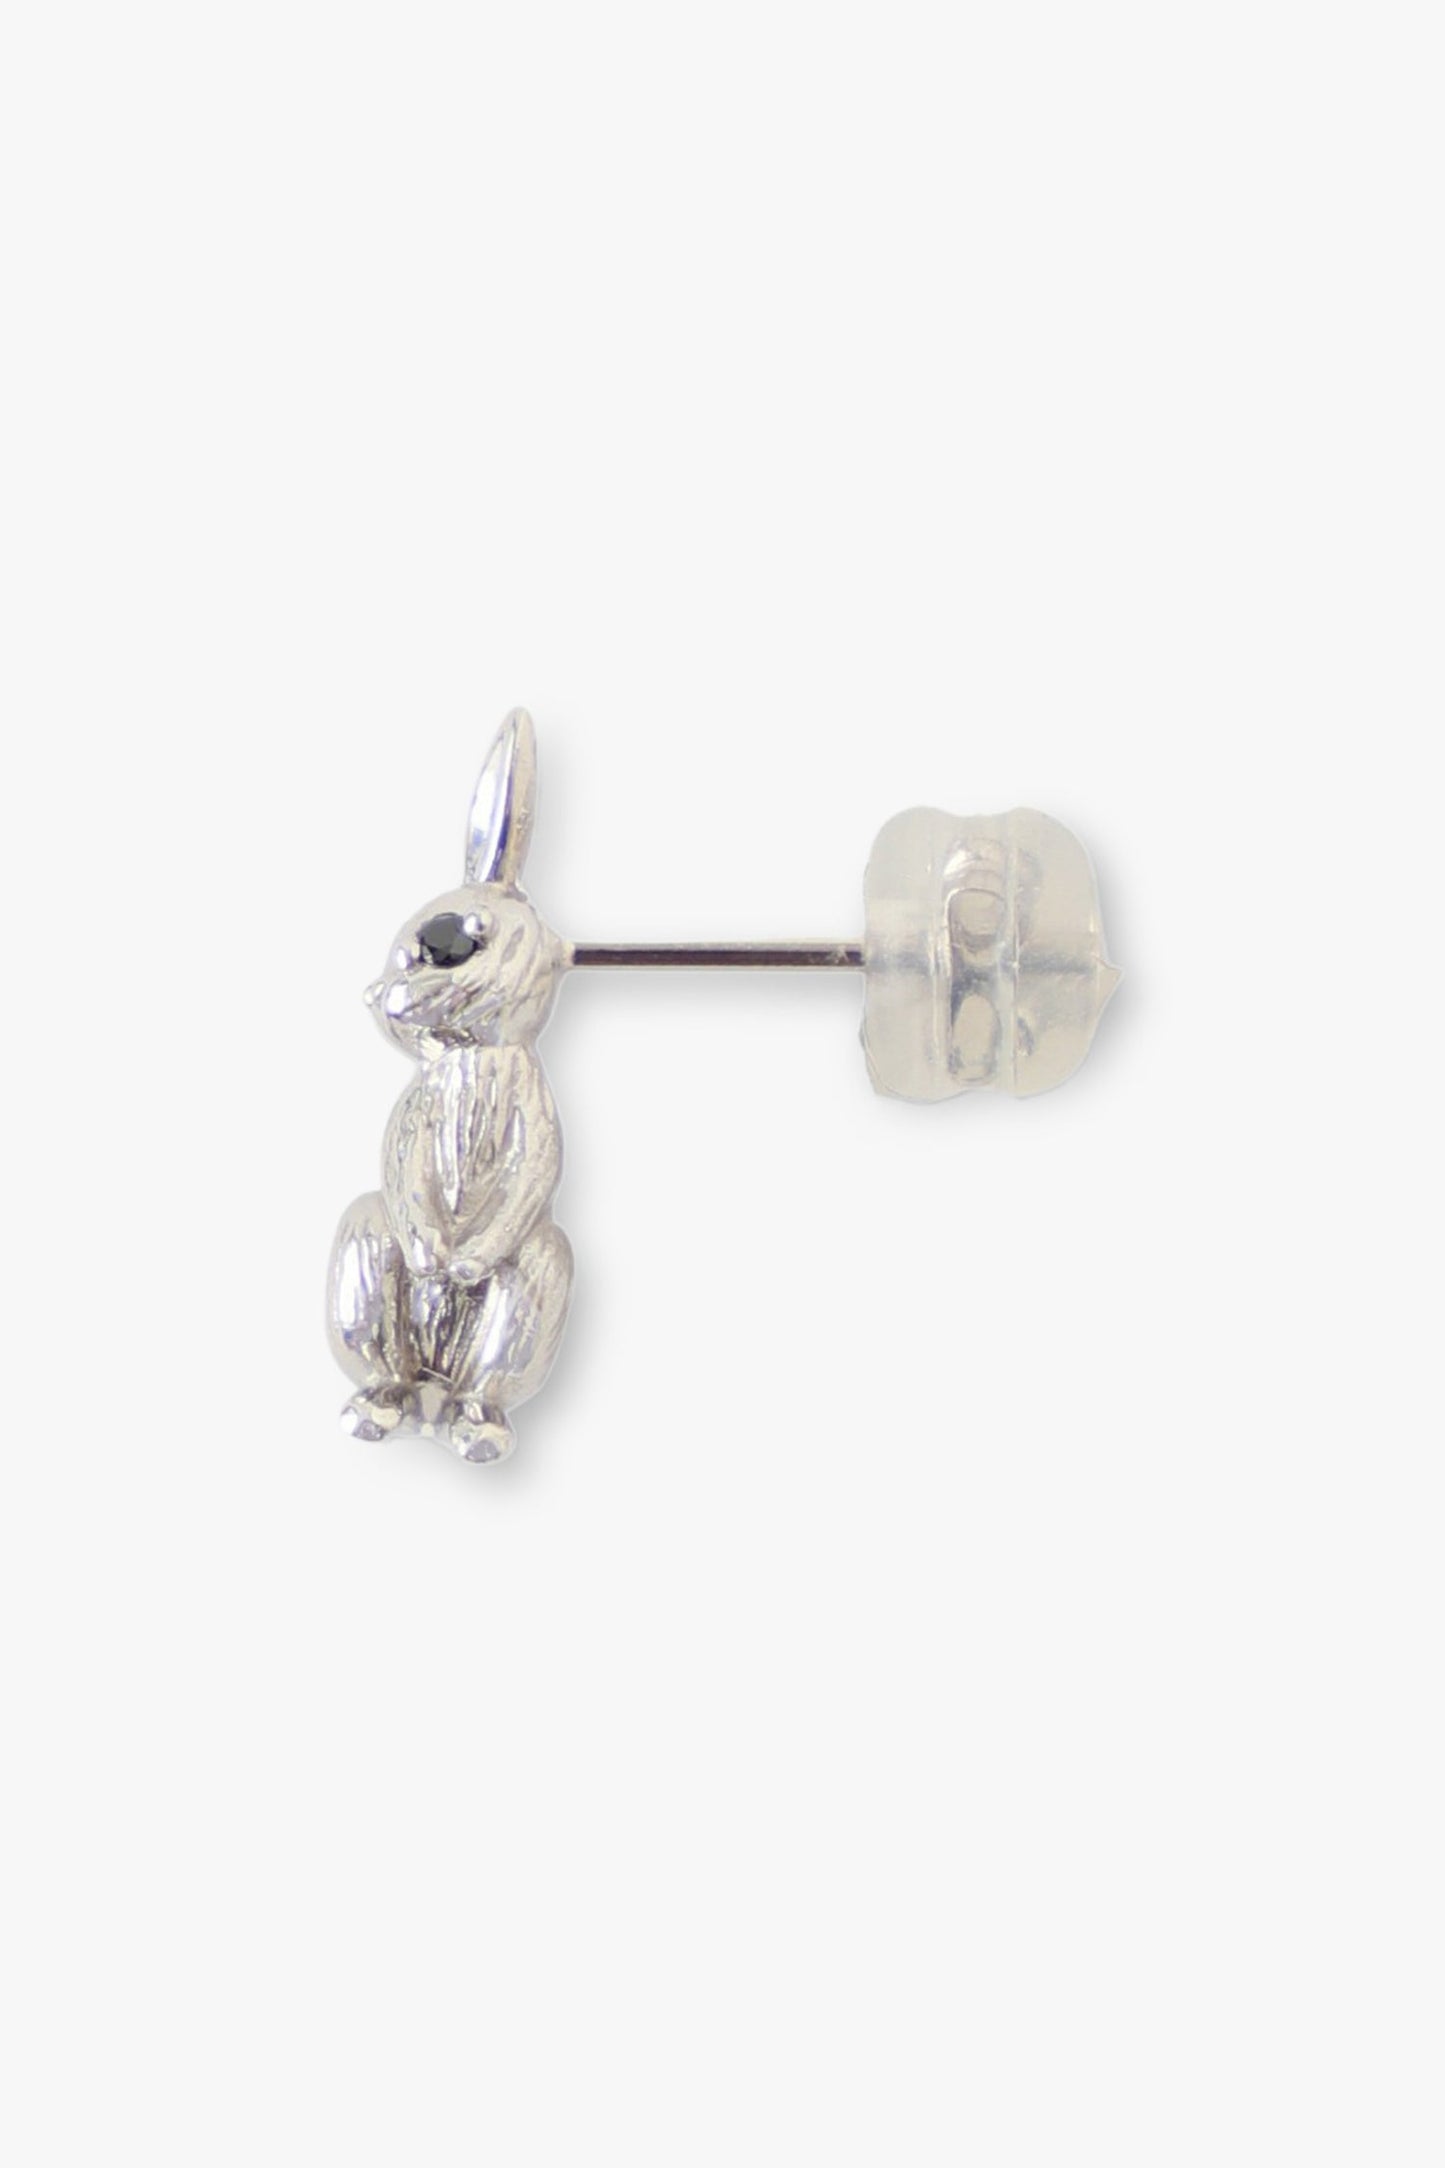 Mismatched Bunny & Carrot Earrings, detail of the friction back with a plastic protection